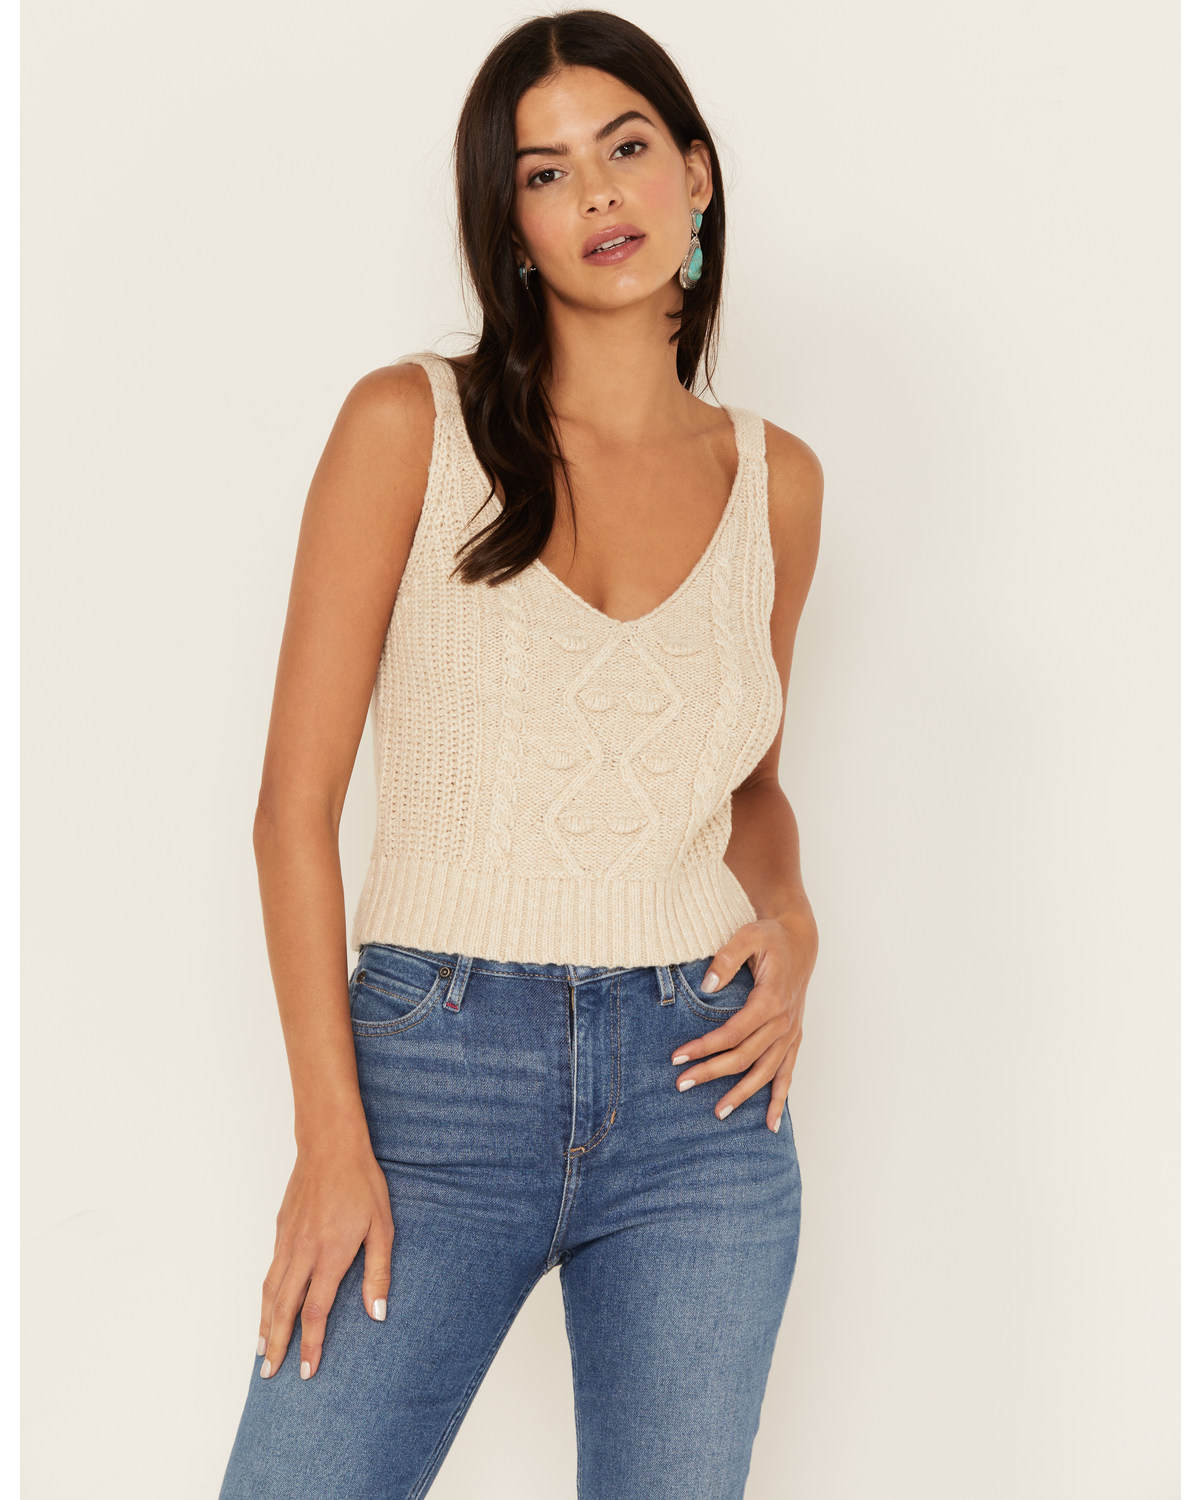 Cleo + Wolf Women's Cropped Cable Knit Sweater Cami Top